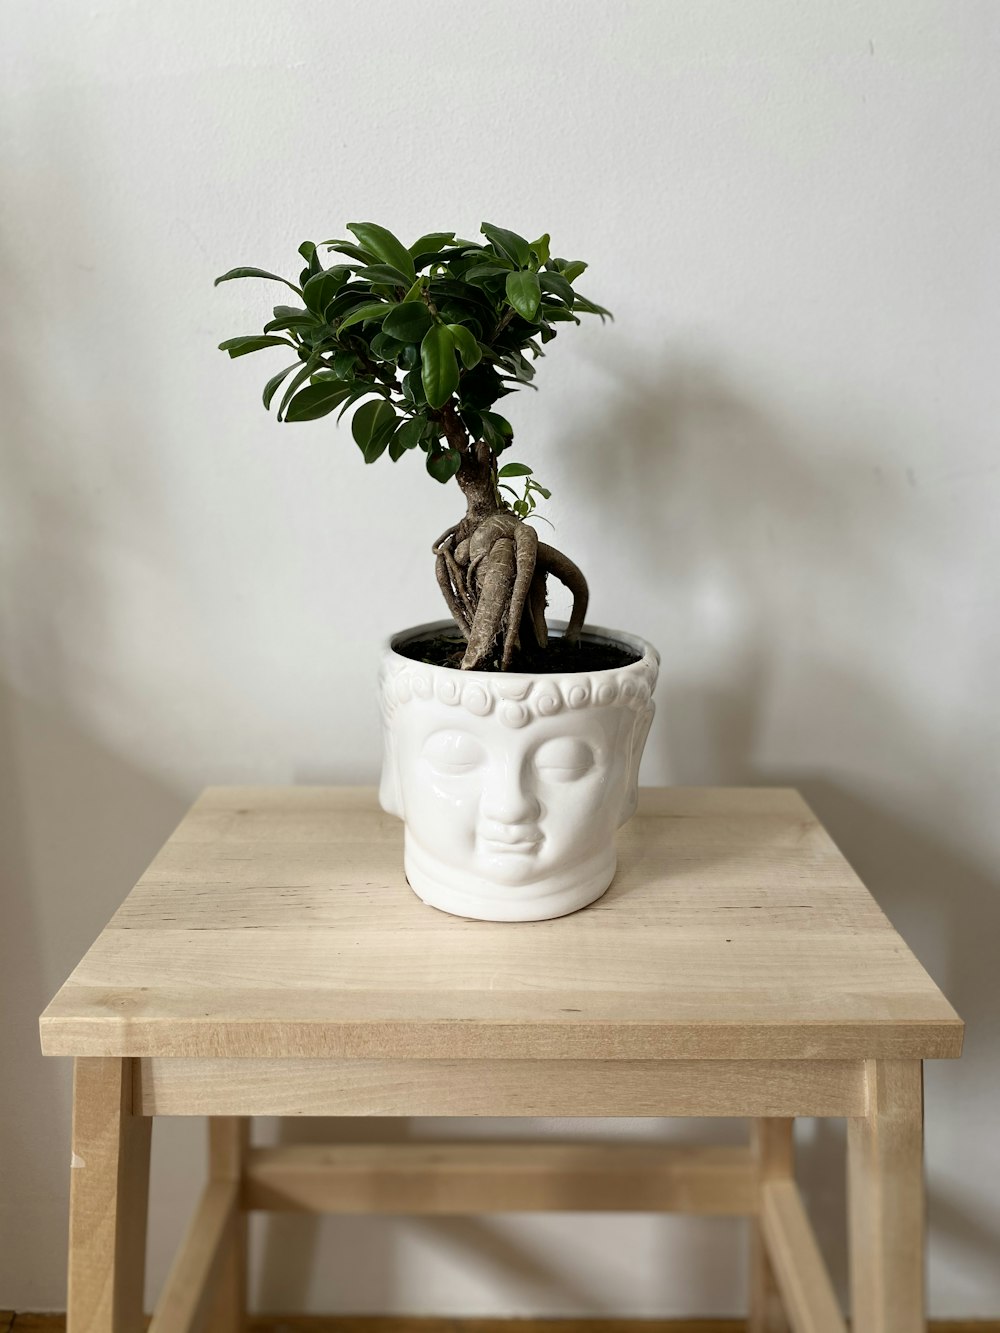 green plant in white ceramic pot on brown wooden table